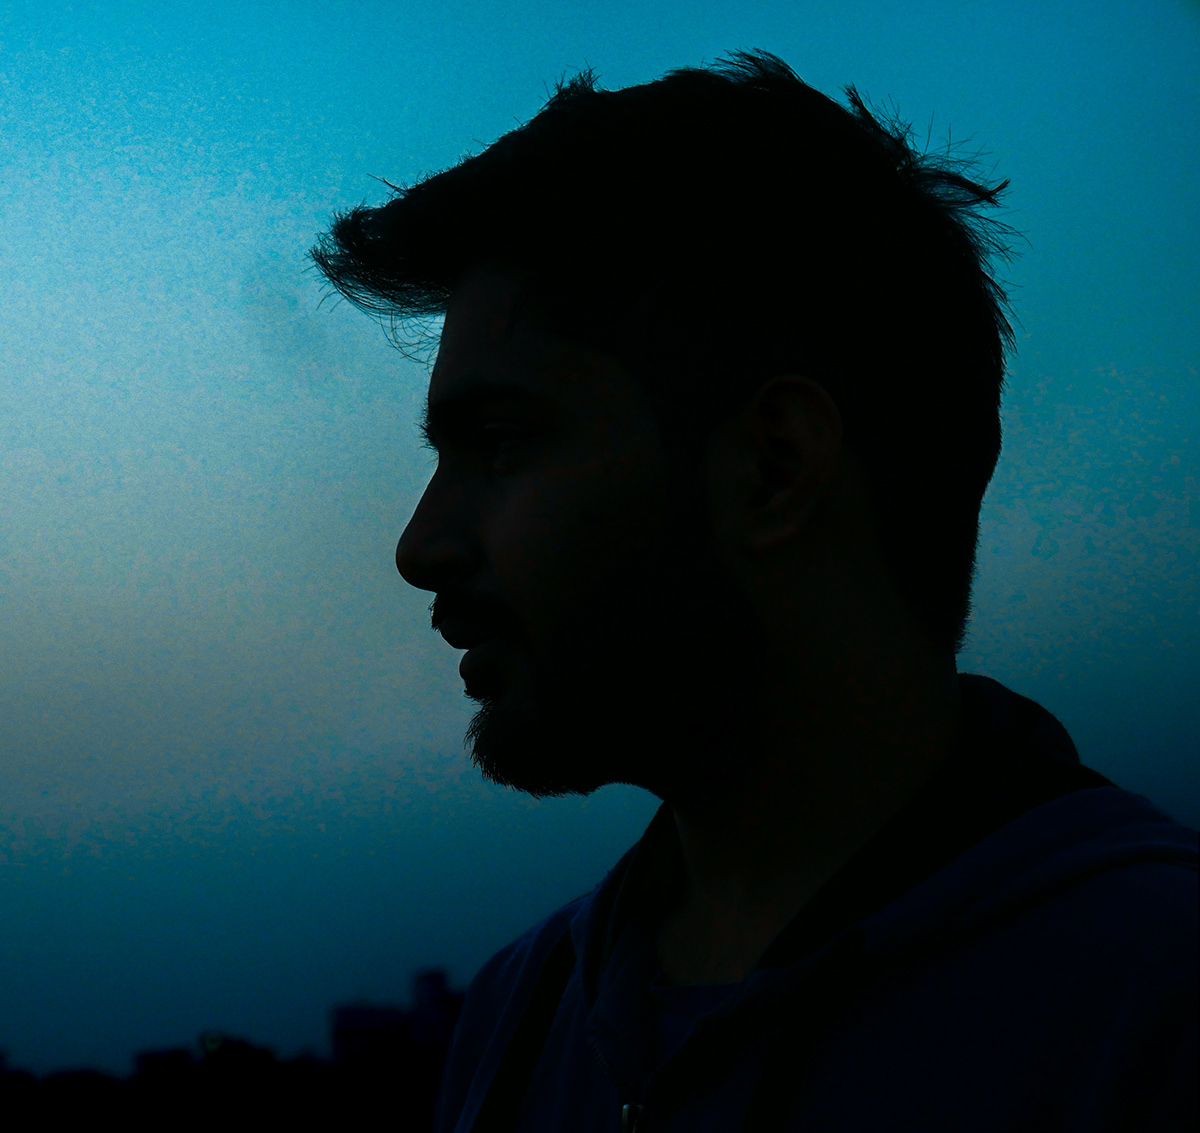 a person in a silhouette form in the blue hour alone